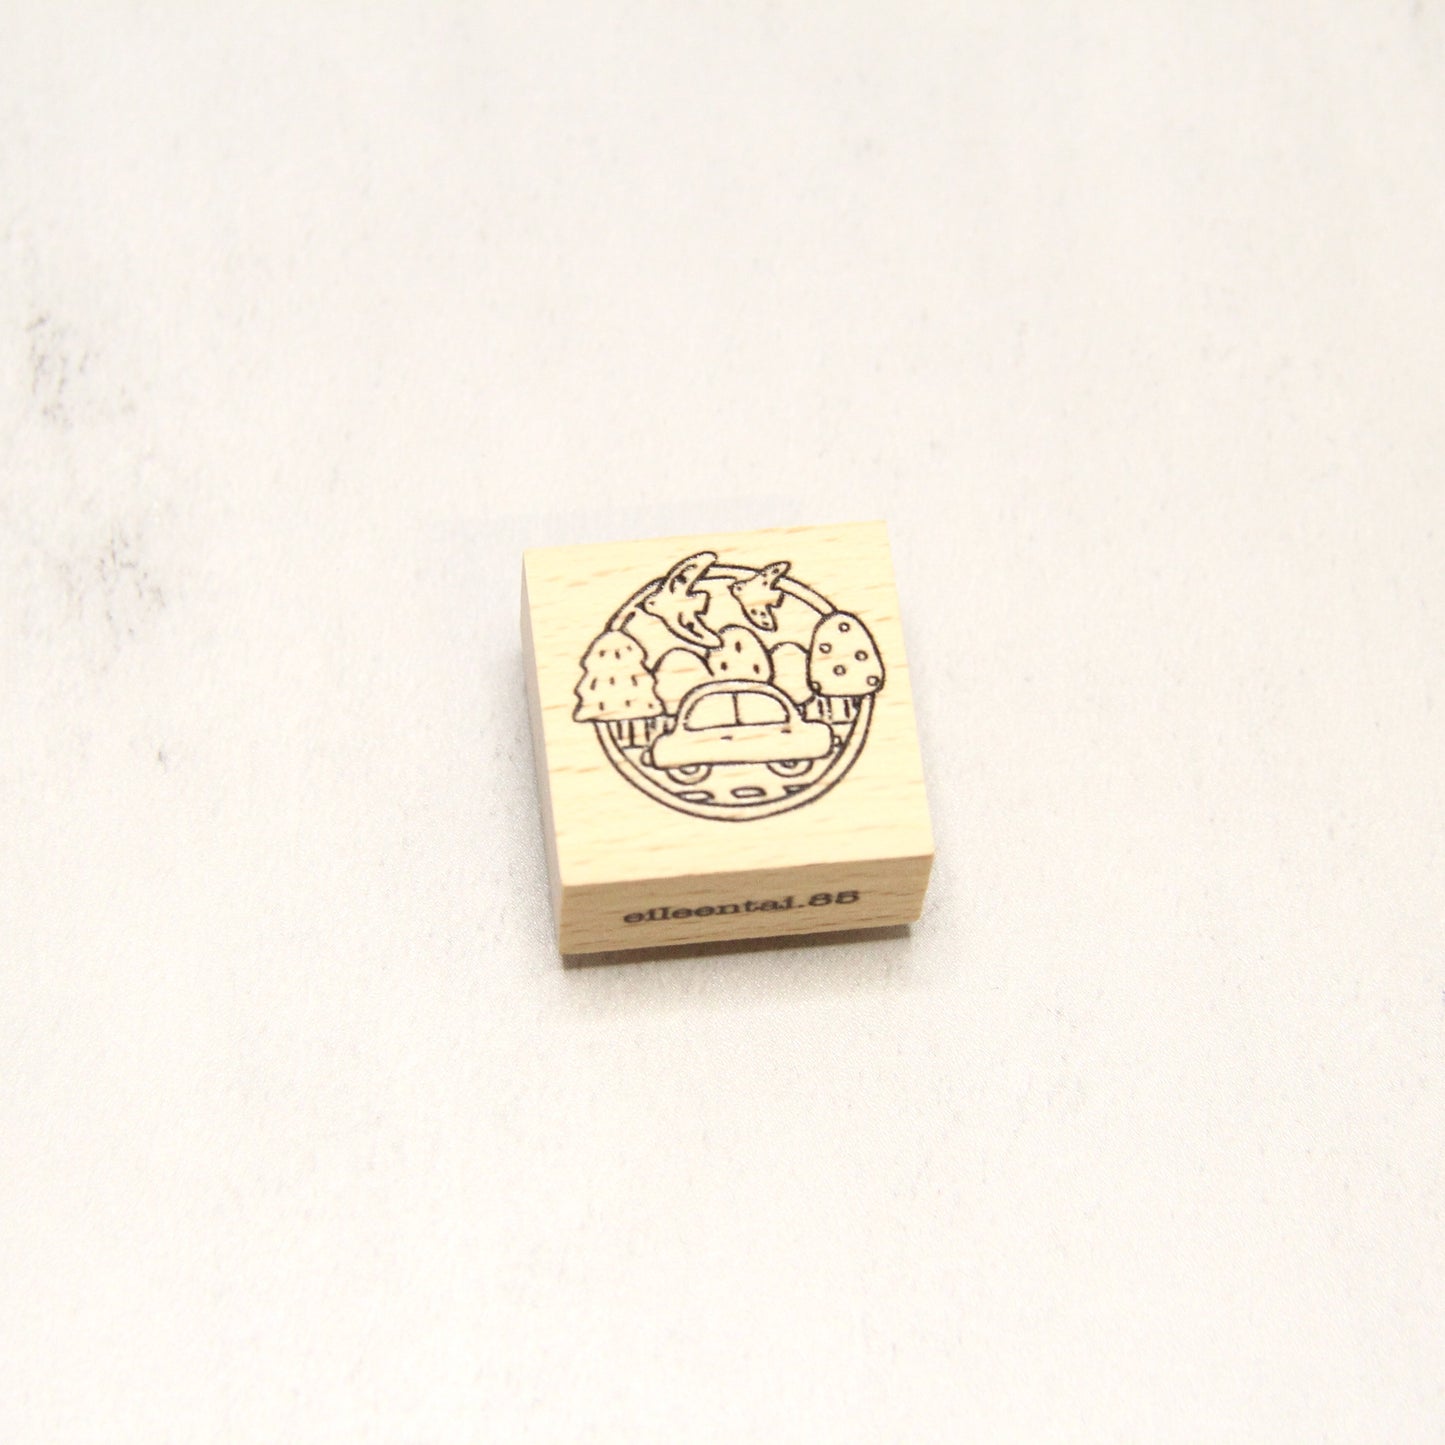 Eileen Tai Rubber Stamp - Let's Go Collection